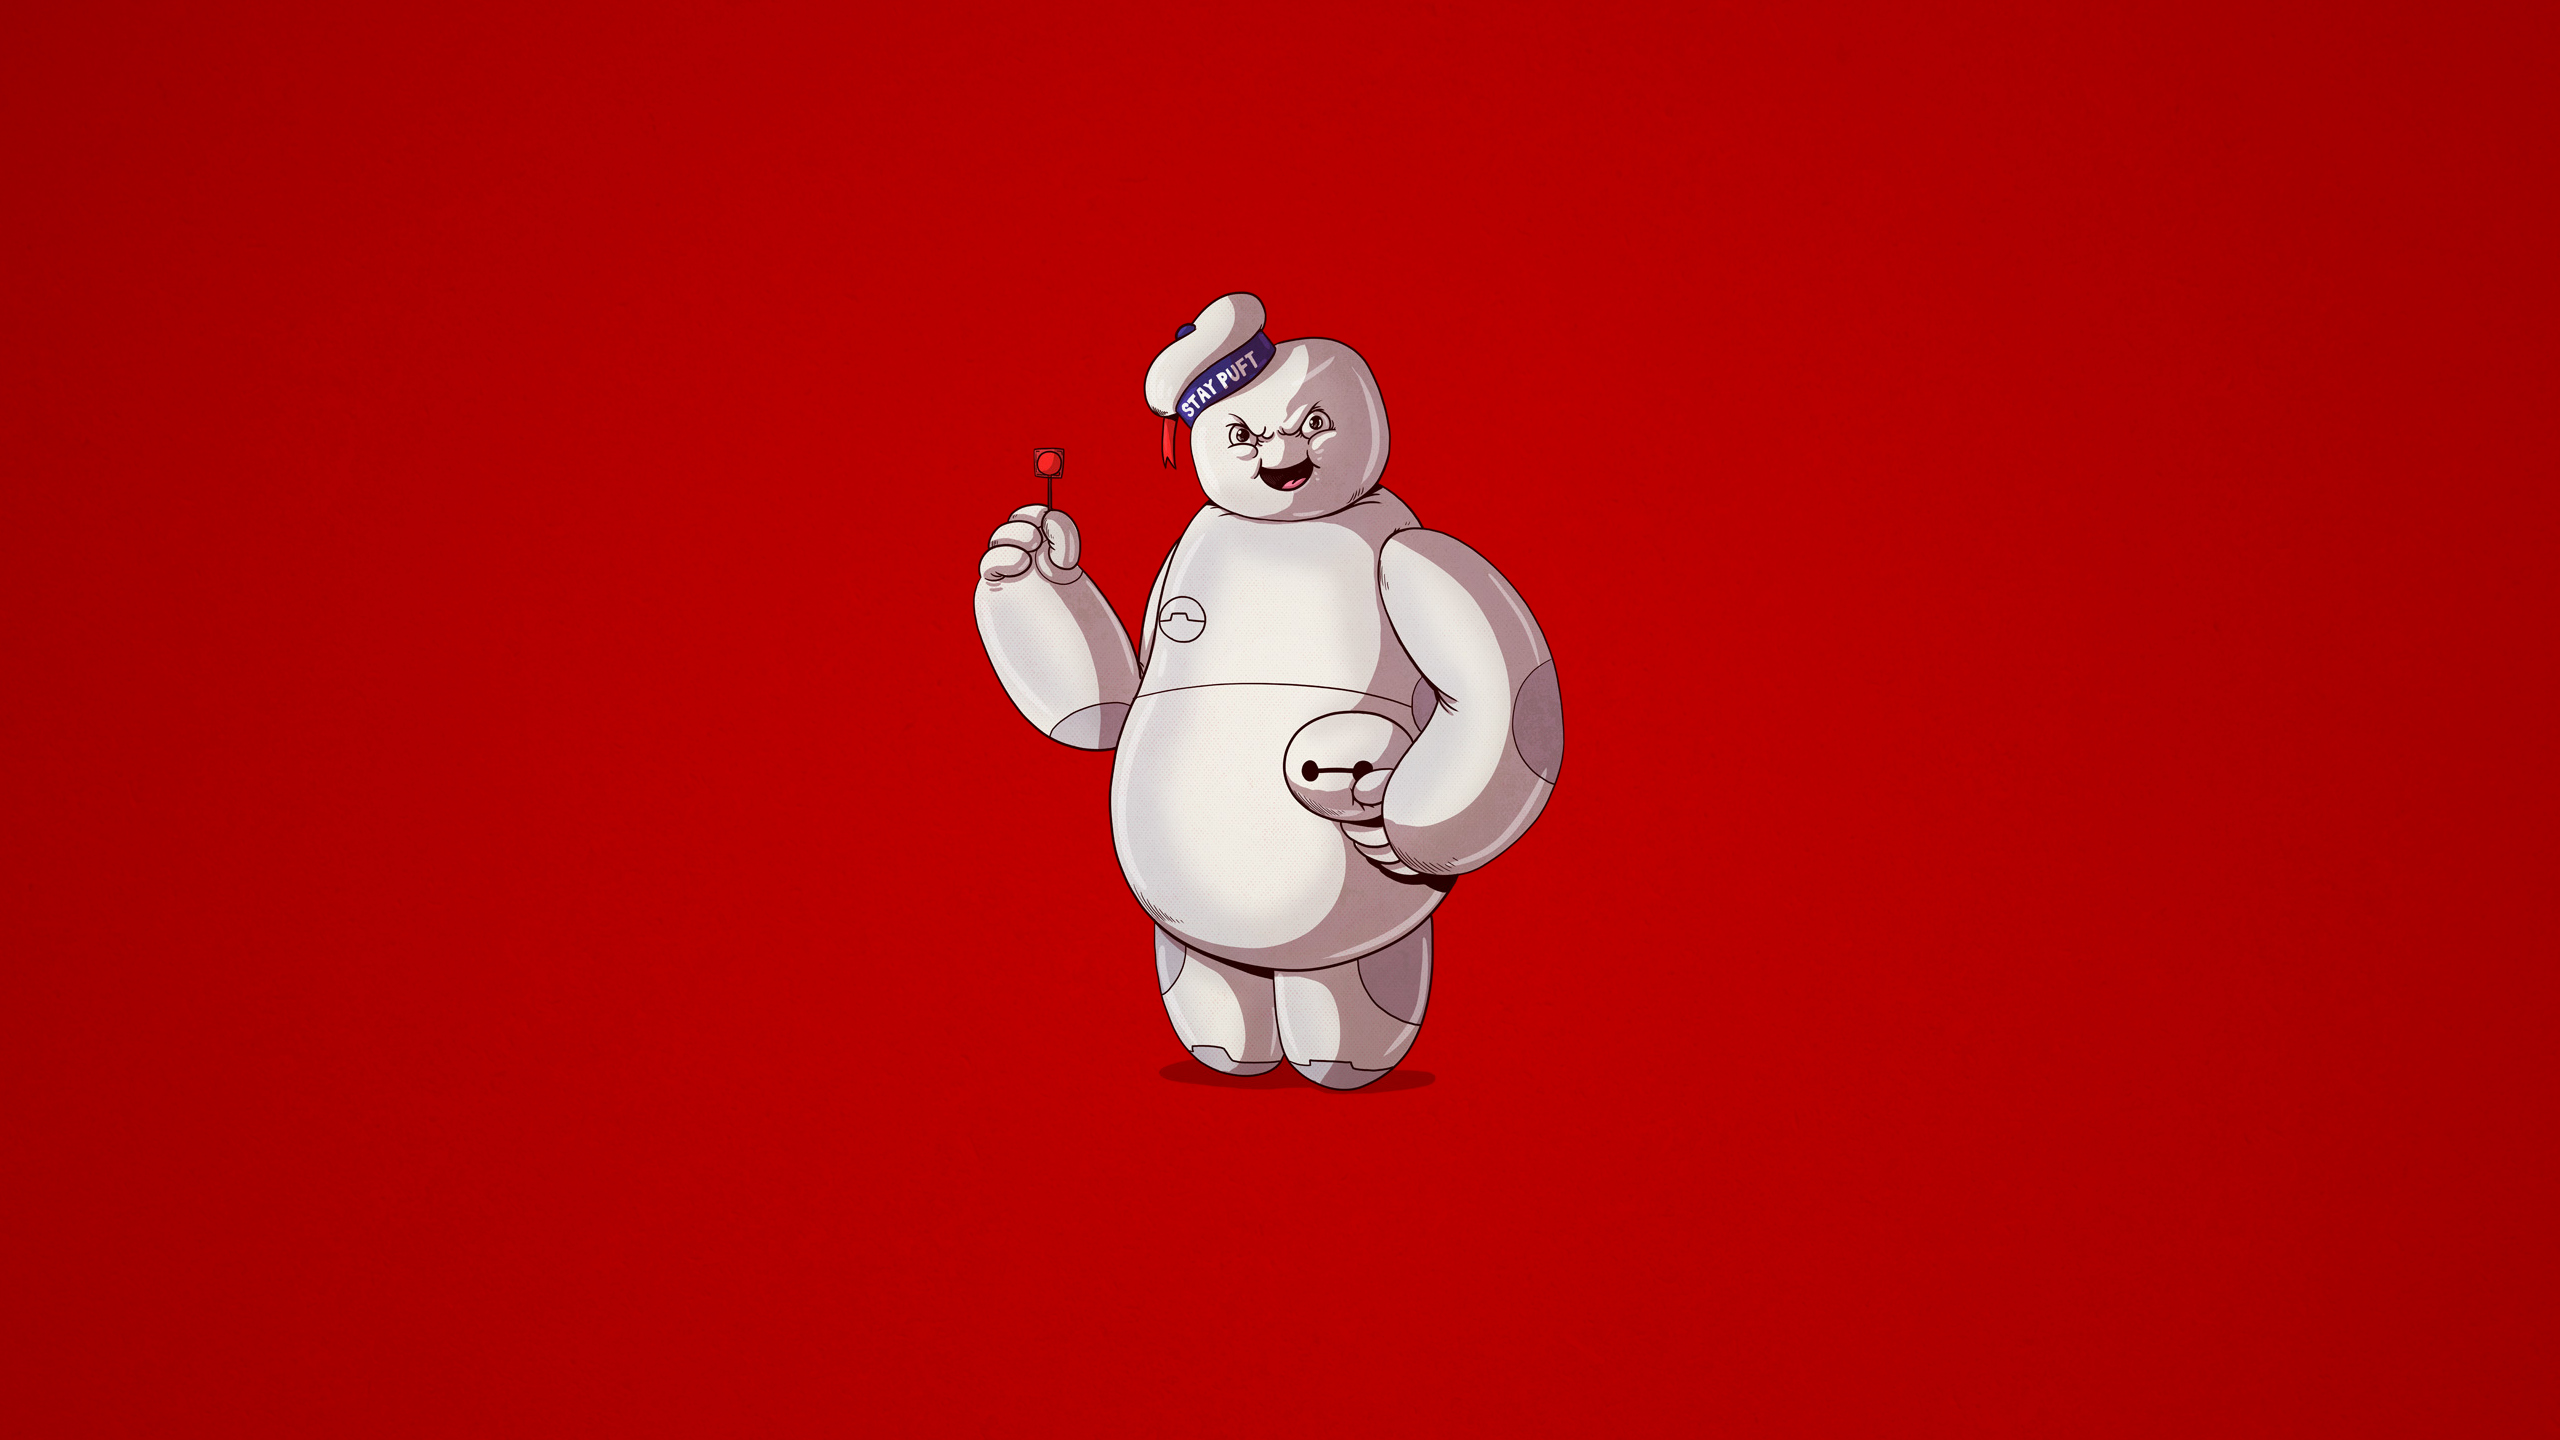 Ghostbusters HD Wallpaper Background